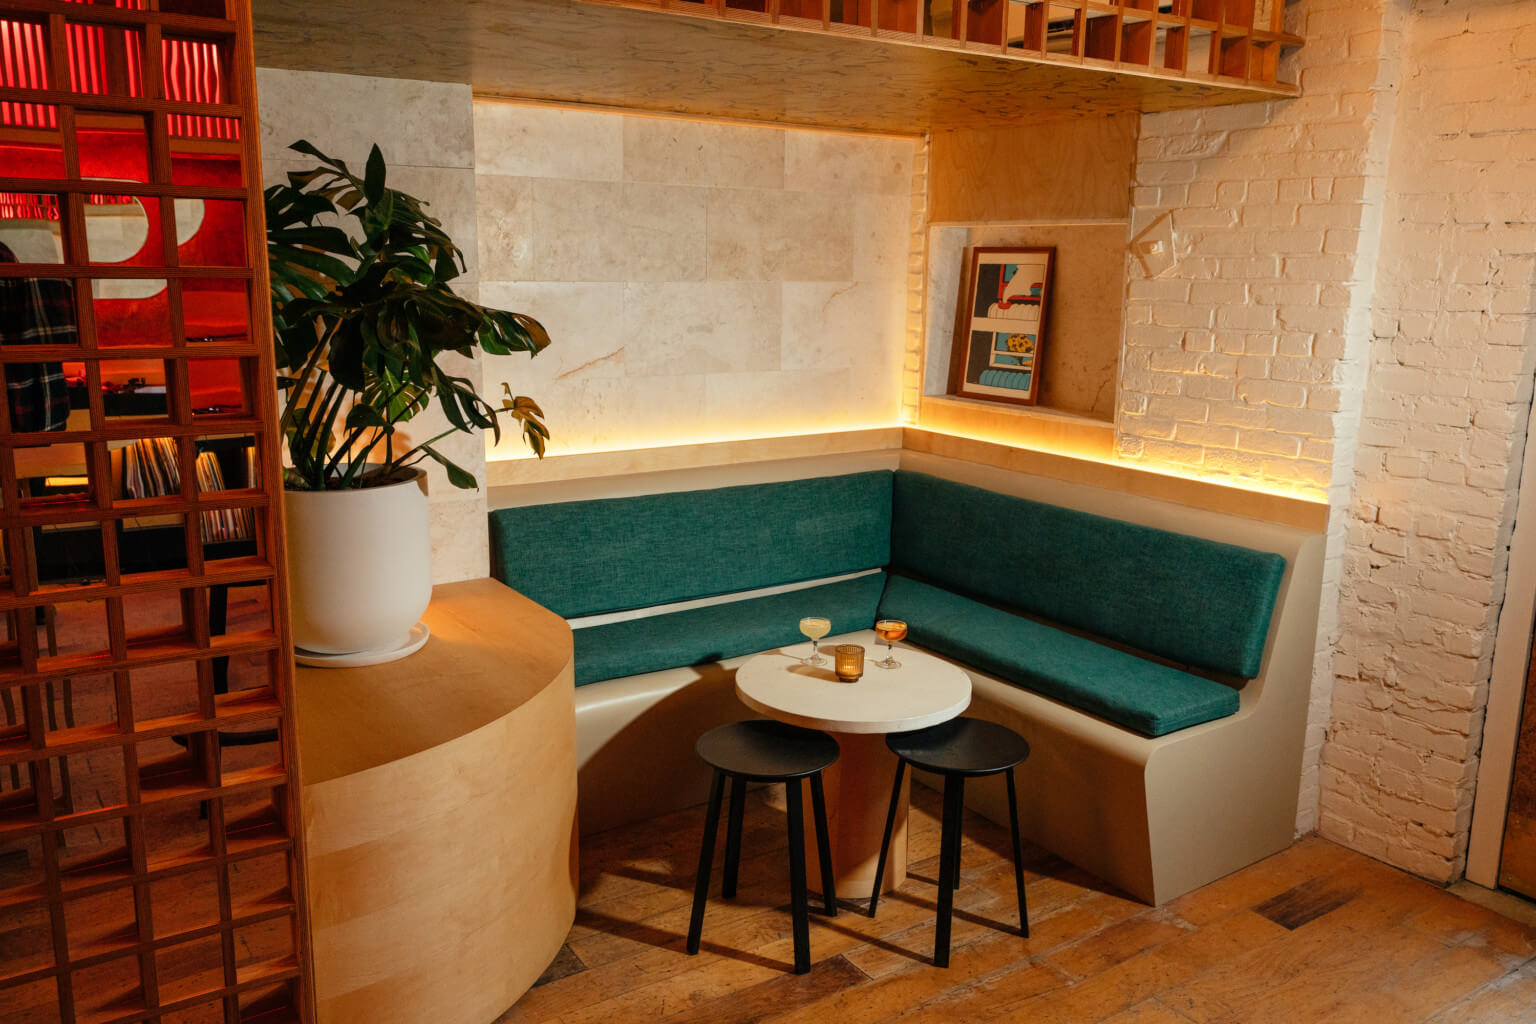 The 36-seat bar serves cocktails and natural wines